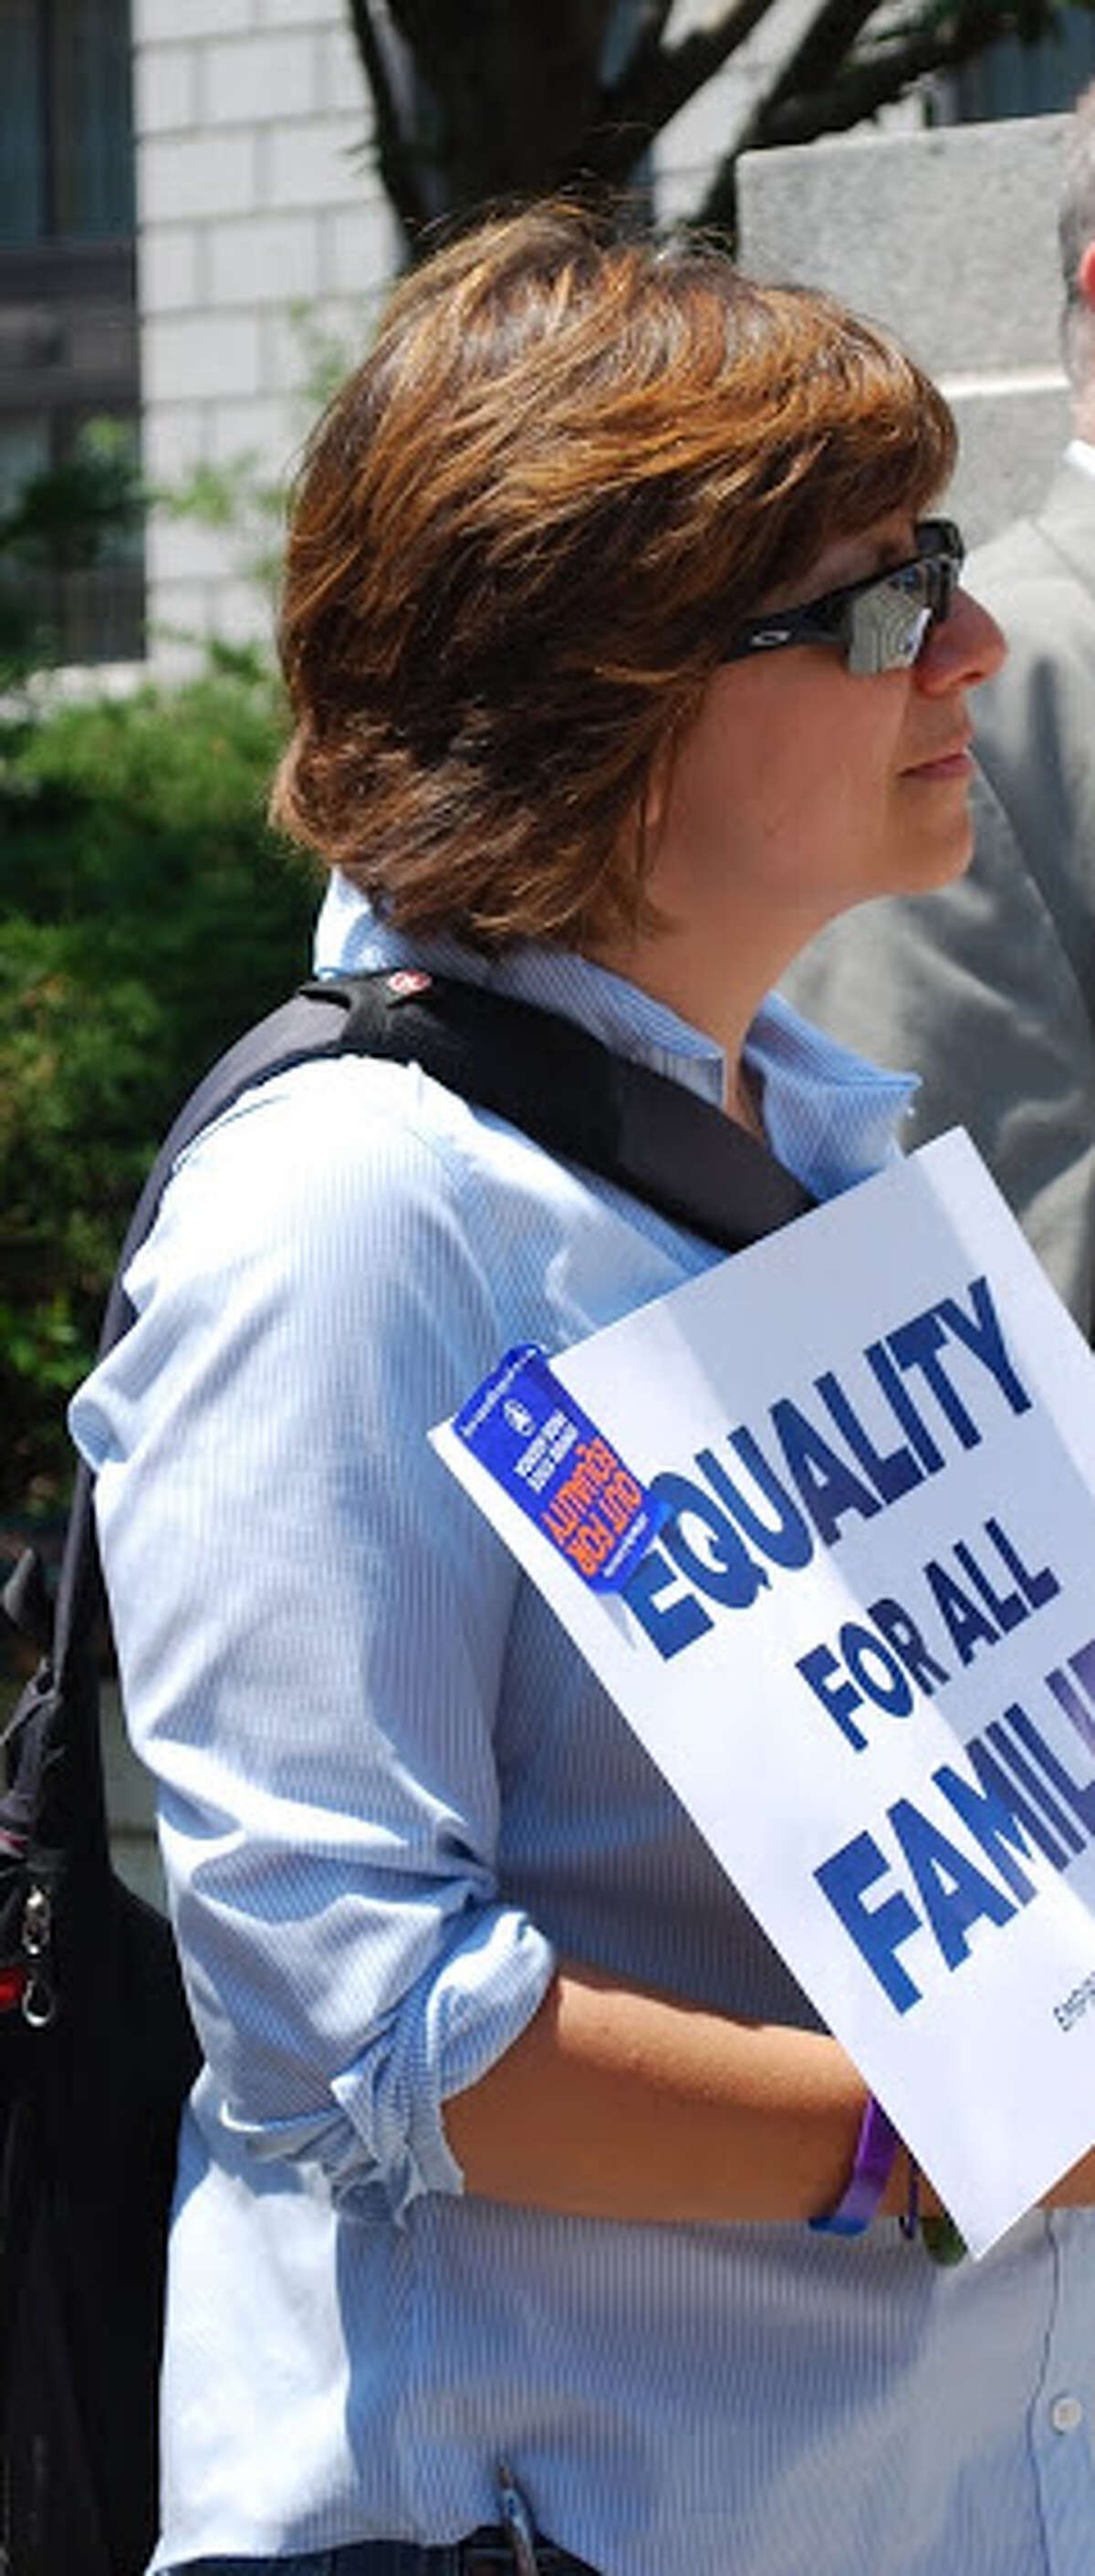 2. I was the lead organizer for the statewide effort to pass marriage equality which occurred in 2011 in NYS and 2012 in entire the US. #goodriddanceDOMA